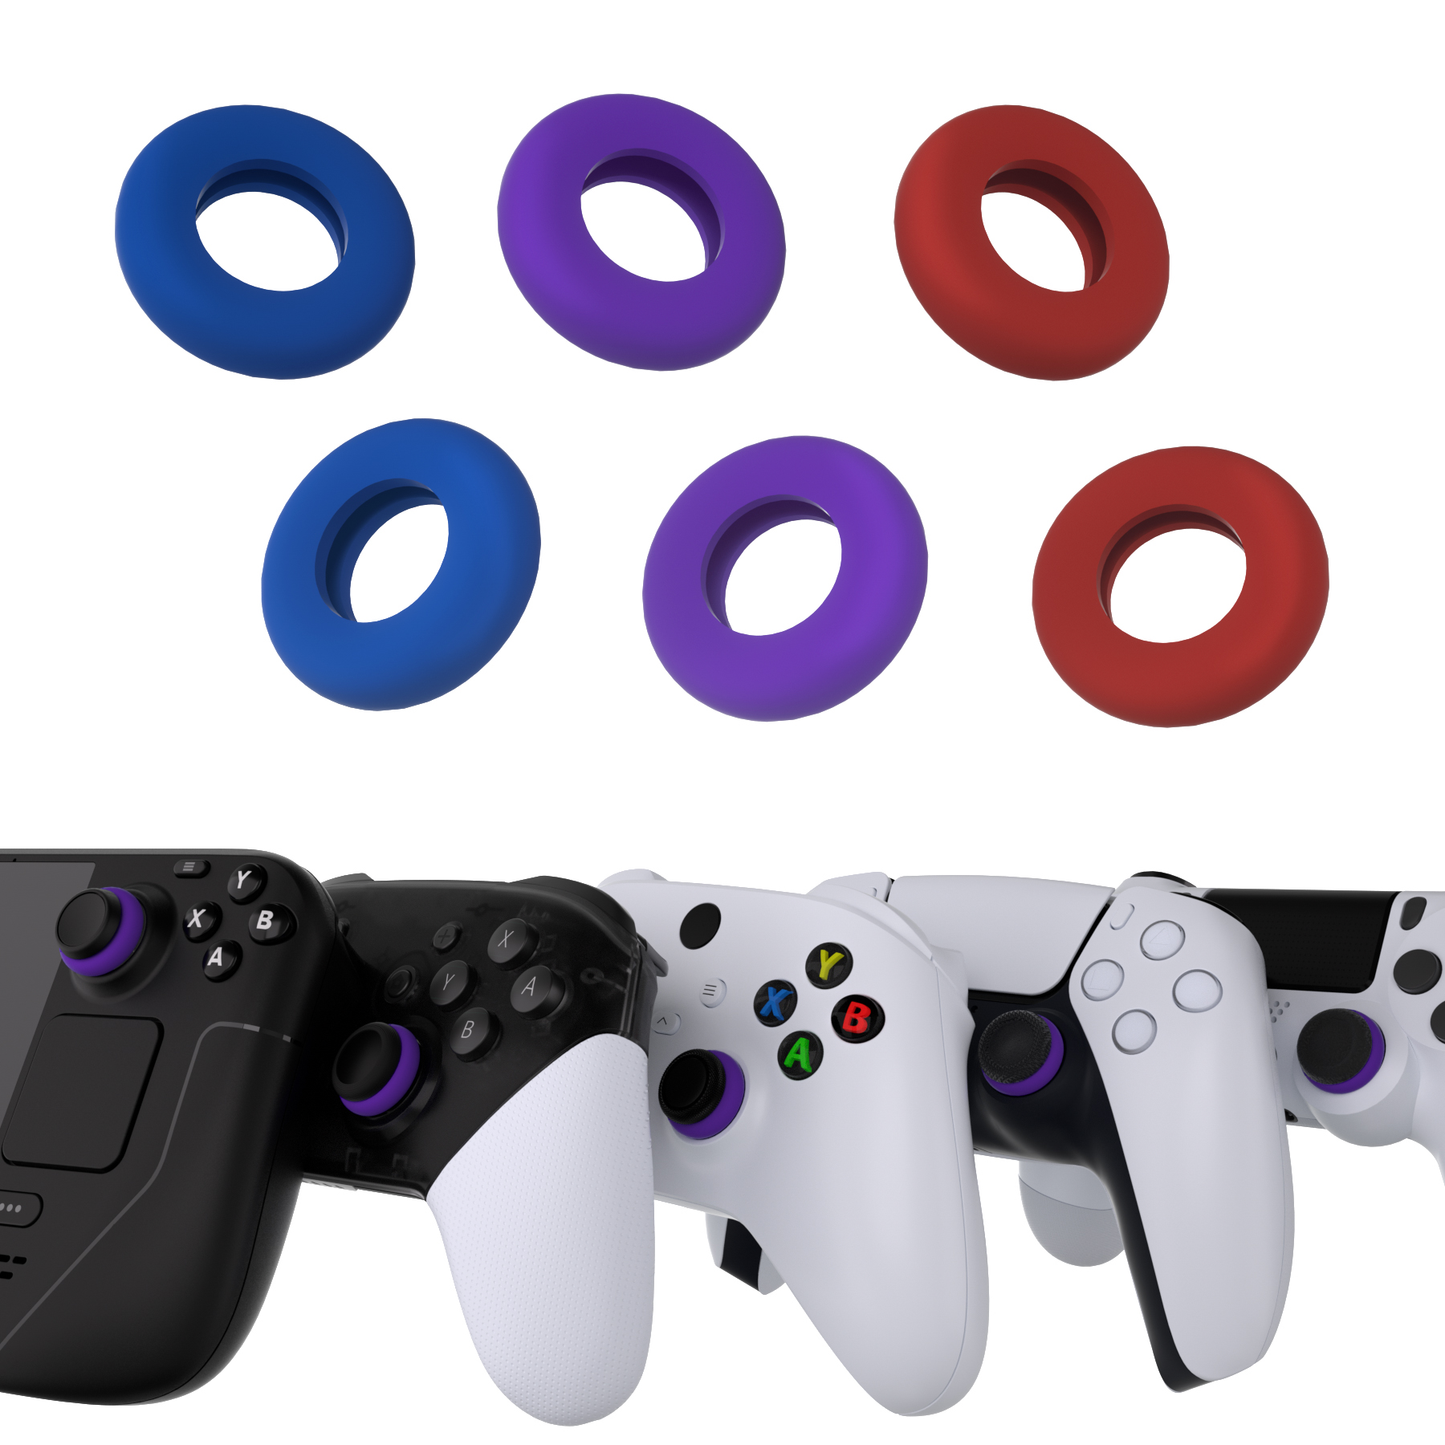 PlayVital 3 Pairs Silicone BuffeRings Aim Assist Target Motion Control Precision Rings for PS5, for PS4, for Xbox Series X/S, Xbox One, Xbox 360, for Switch Pro, for Steam Deck - 3 Different Strengths - PFPJ096 PlayVital